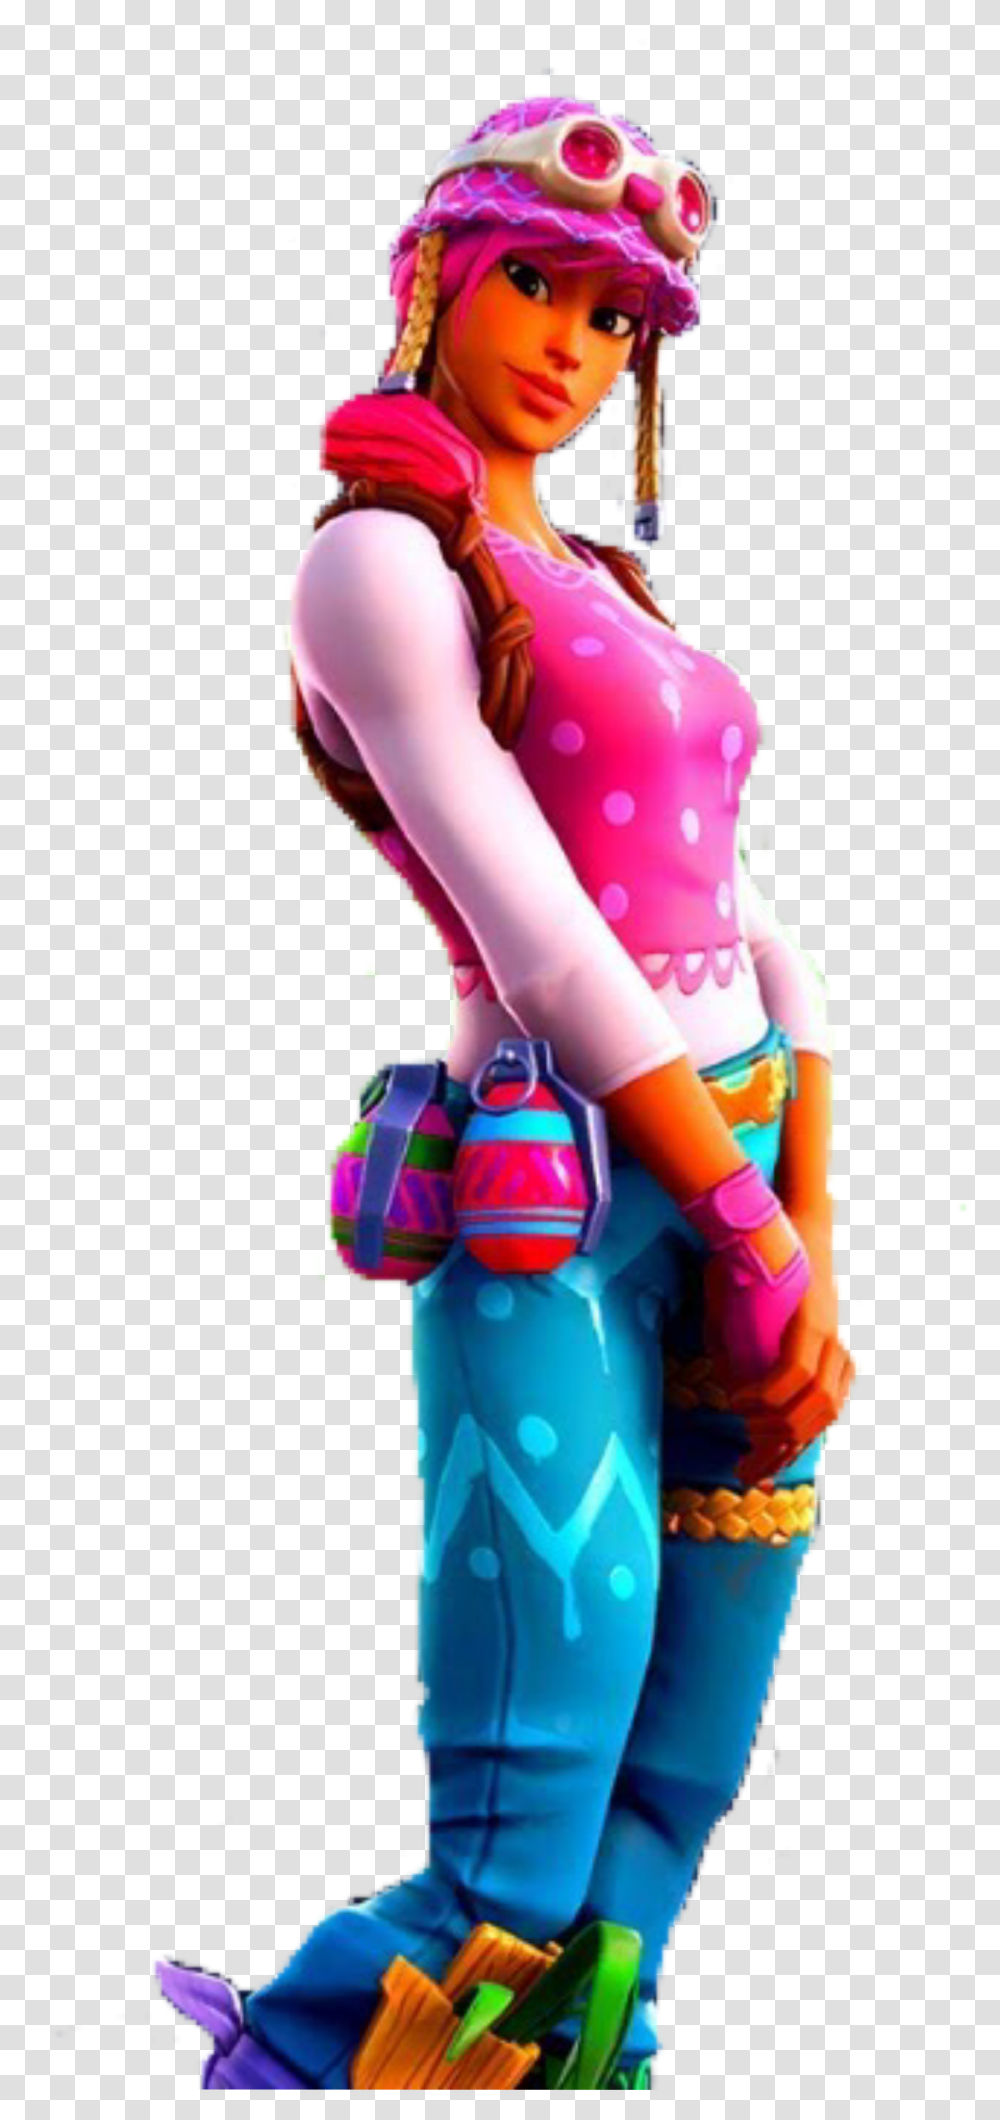 Fortnite Pastel Posted By Michelle Johnson Fortnite Pastel Skin, Person, Human, Clothing, Graphics Transparent Png